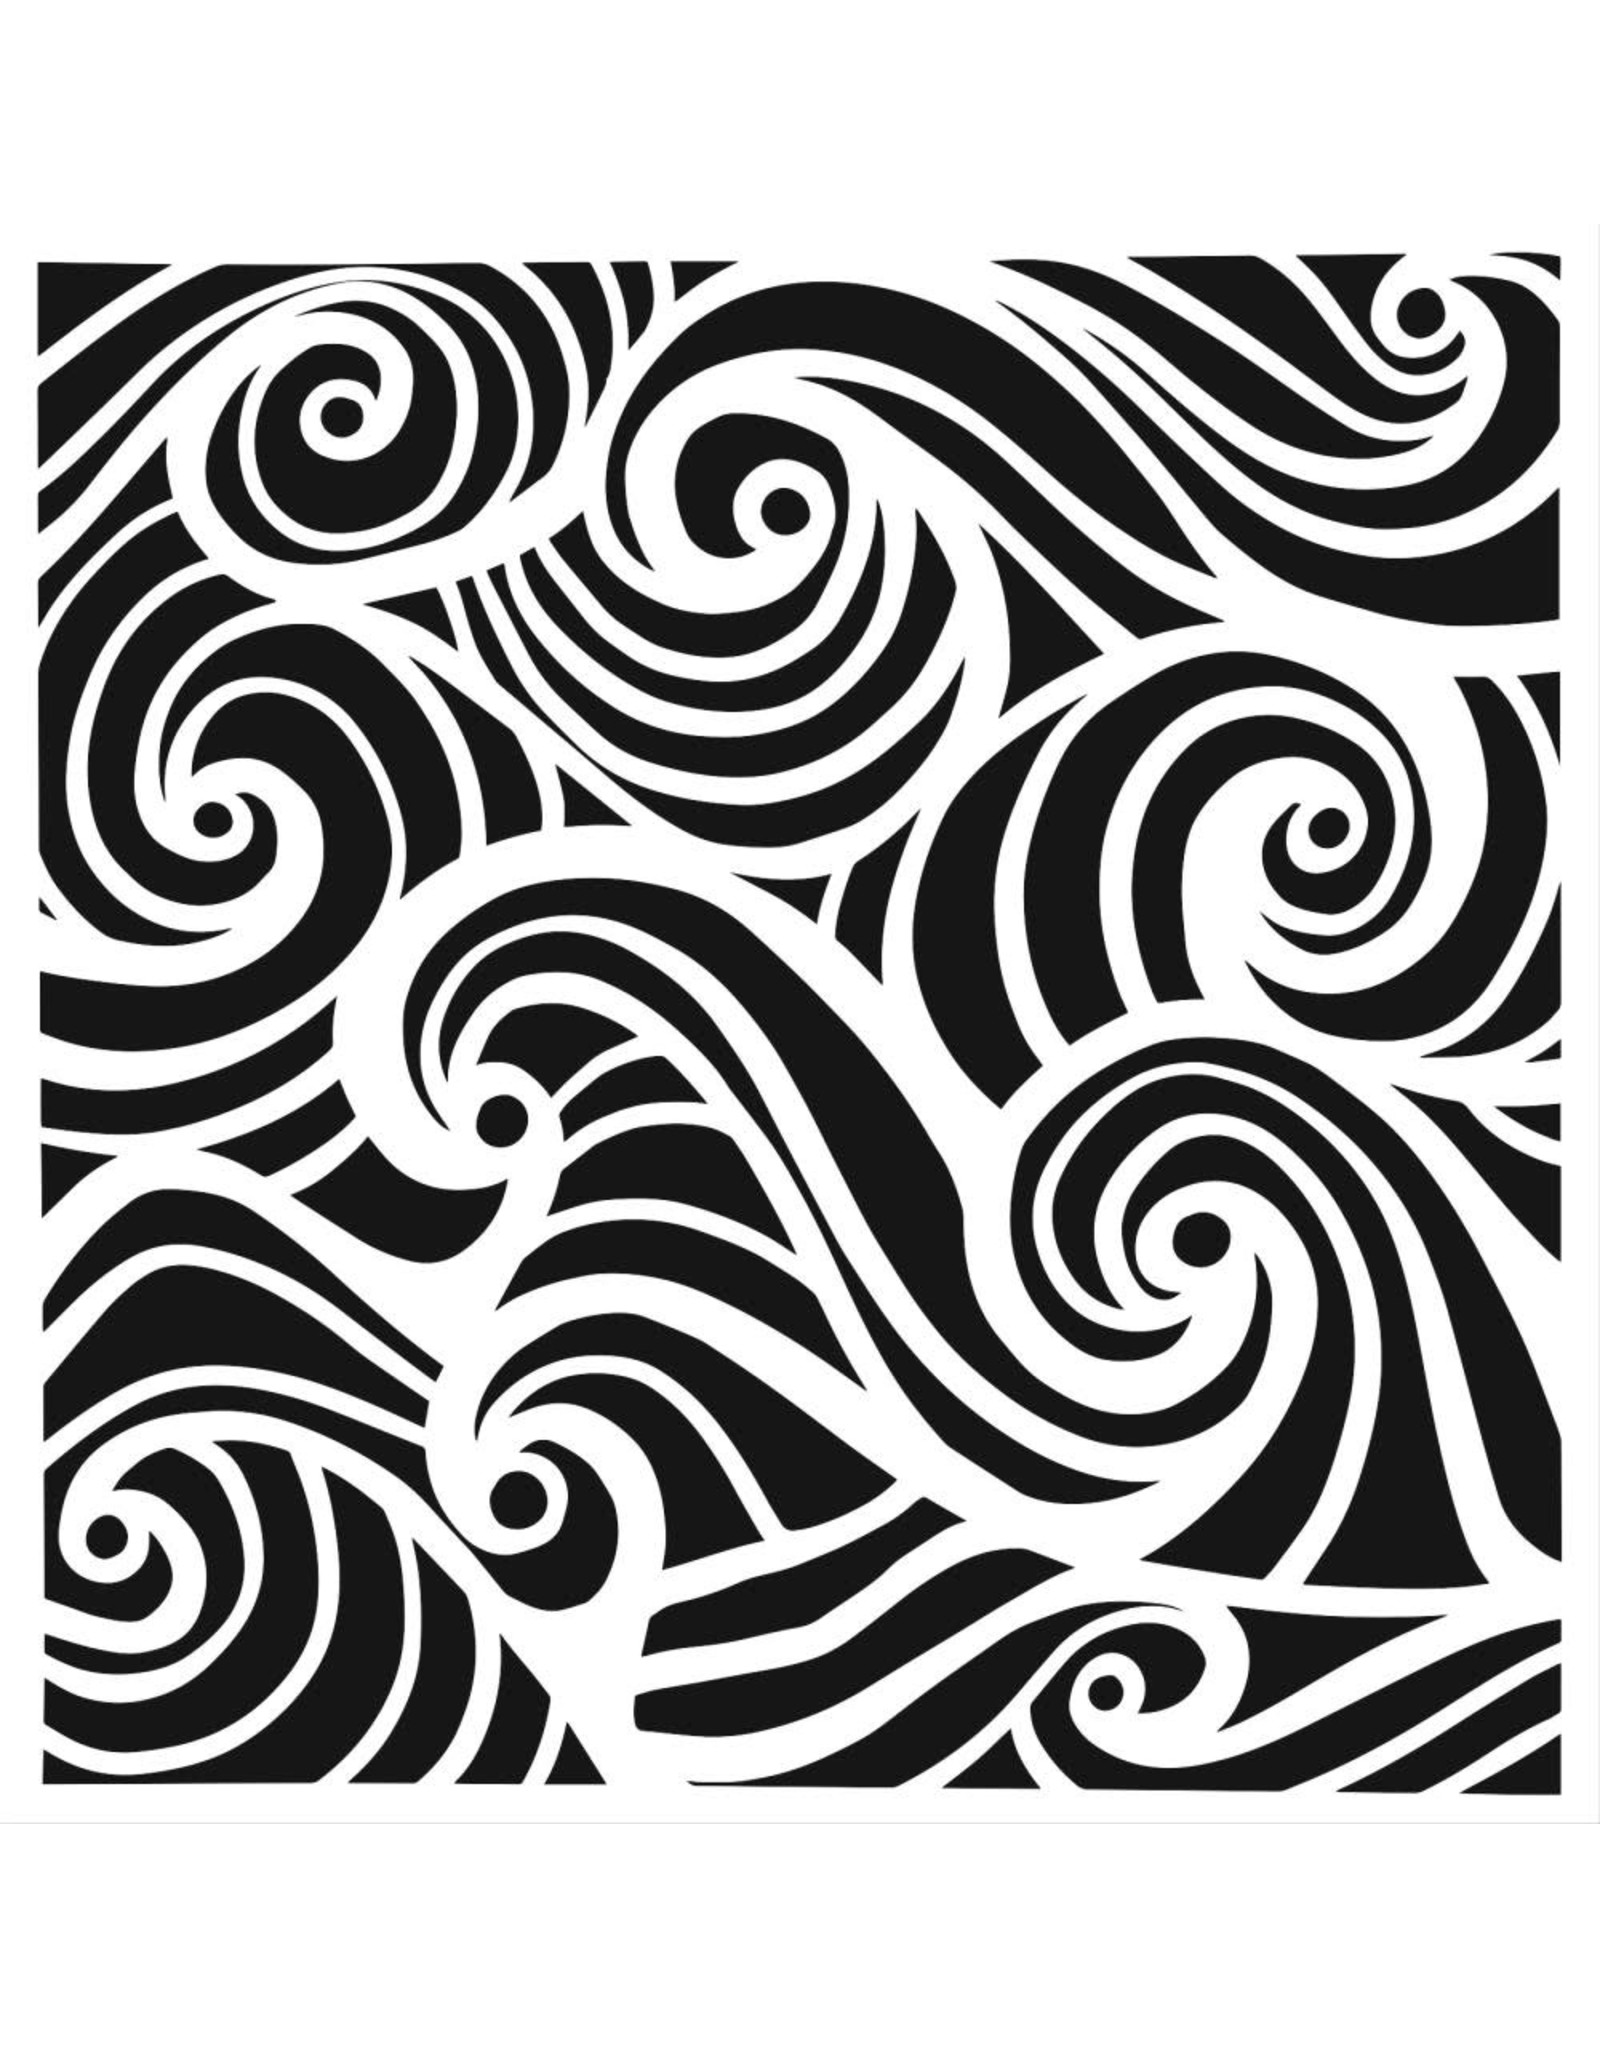 CRAFTERS WORKSHOP THE CRAFTERS WORKSHOP CATHLIN LARSEN SWIRLING WAVES 6x6 STENCIL